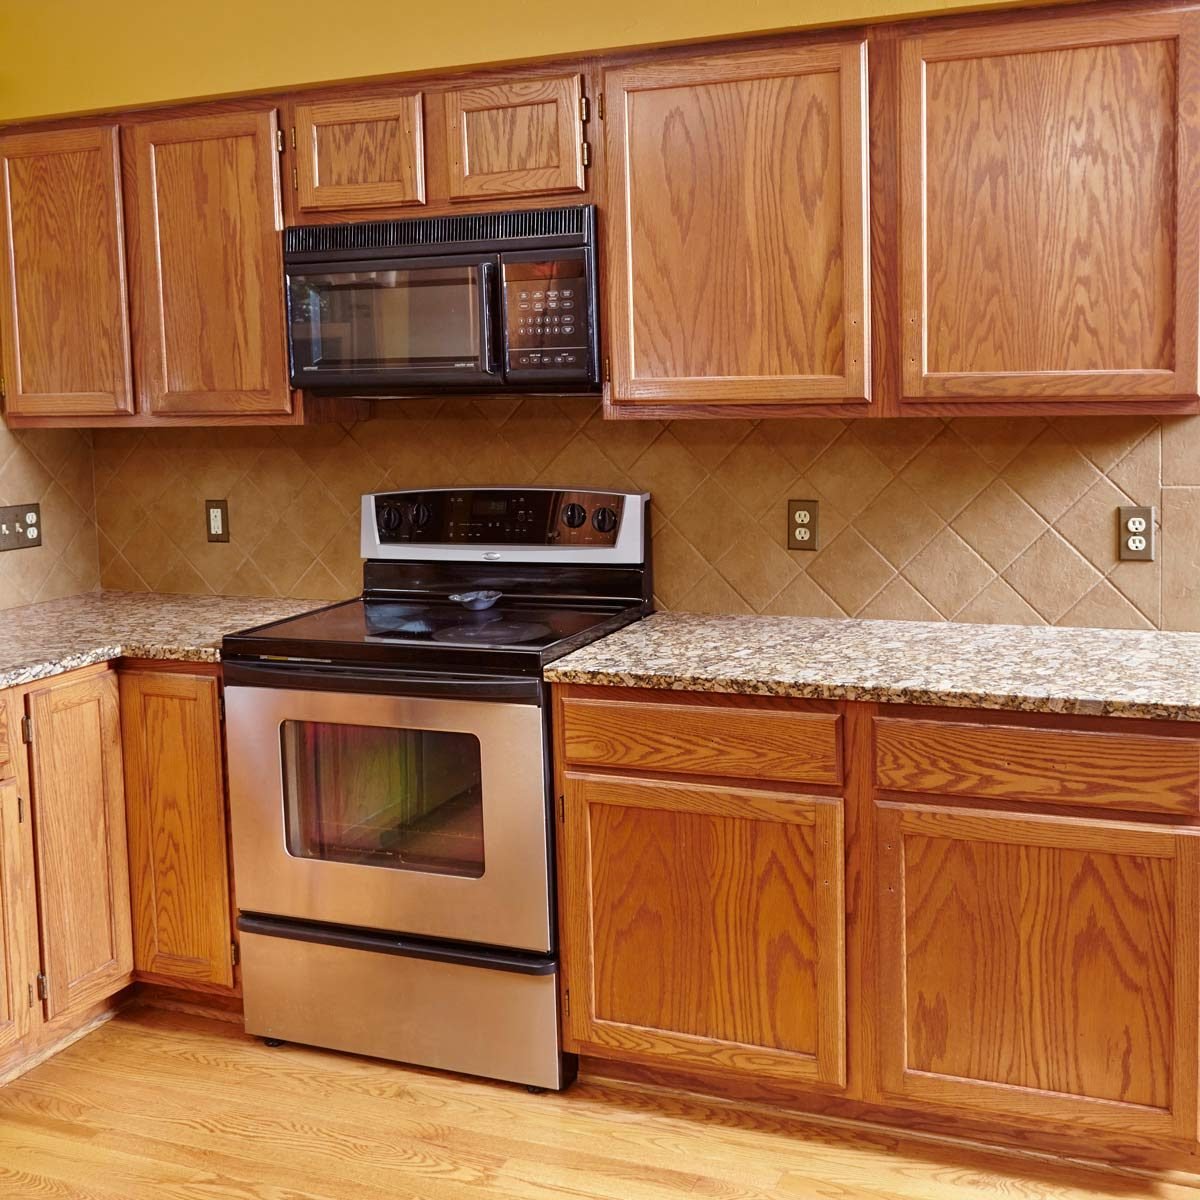 Cabinet Refacing How To Reface Kitchen Cabinets